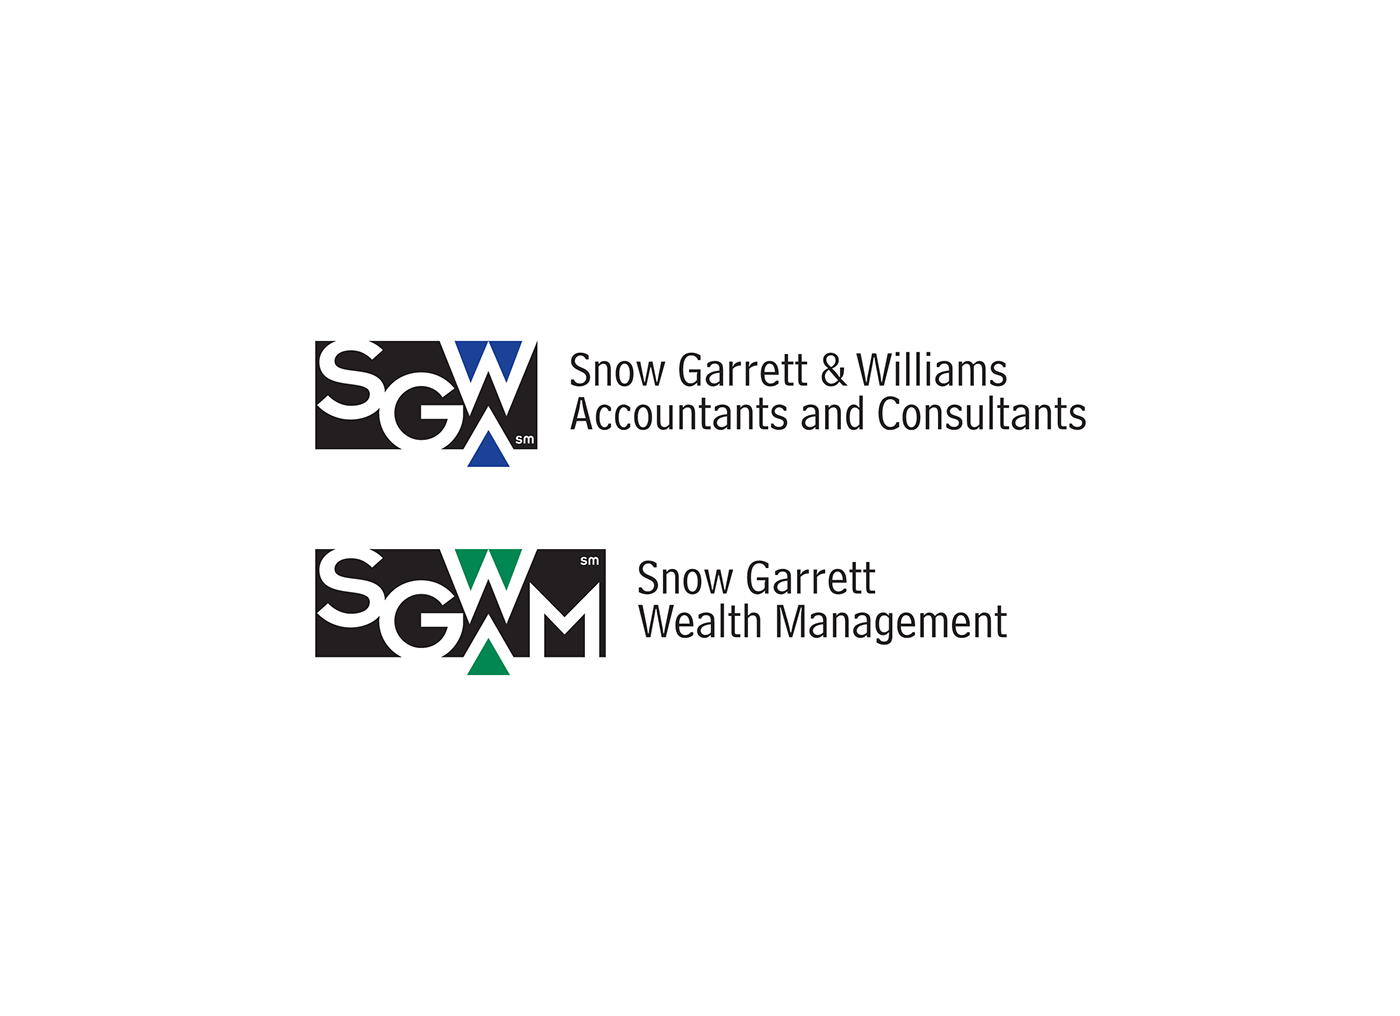 logos for related accounting and wealth management firms